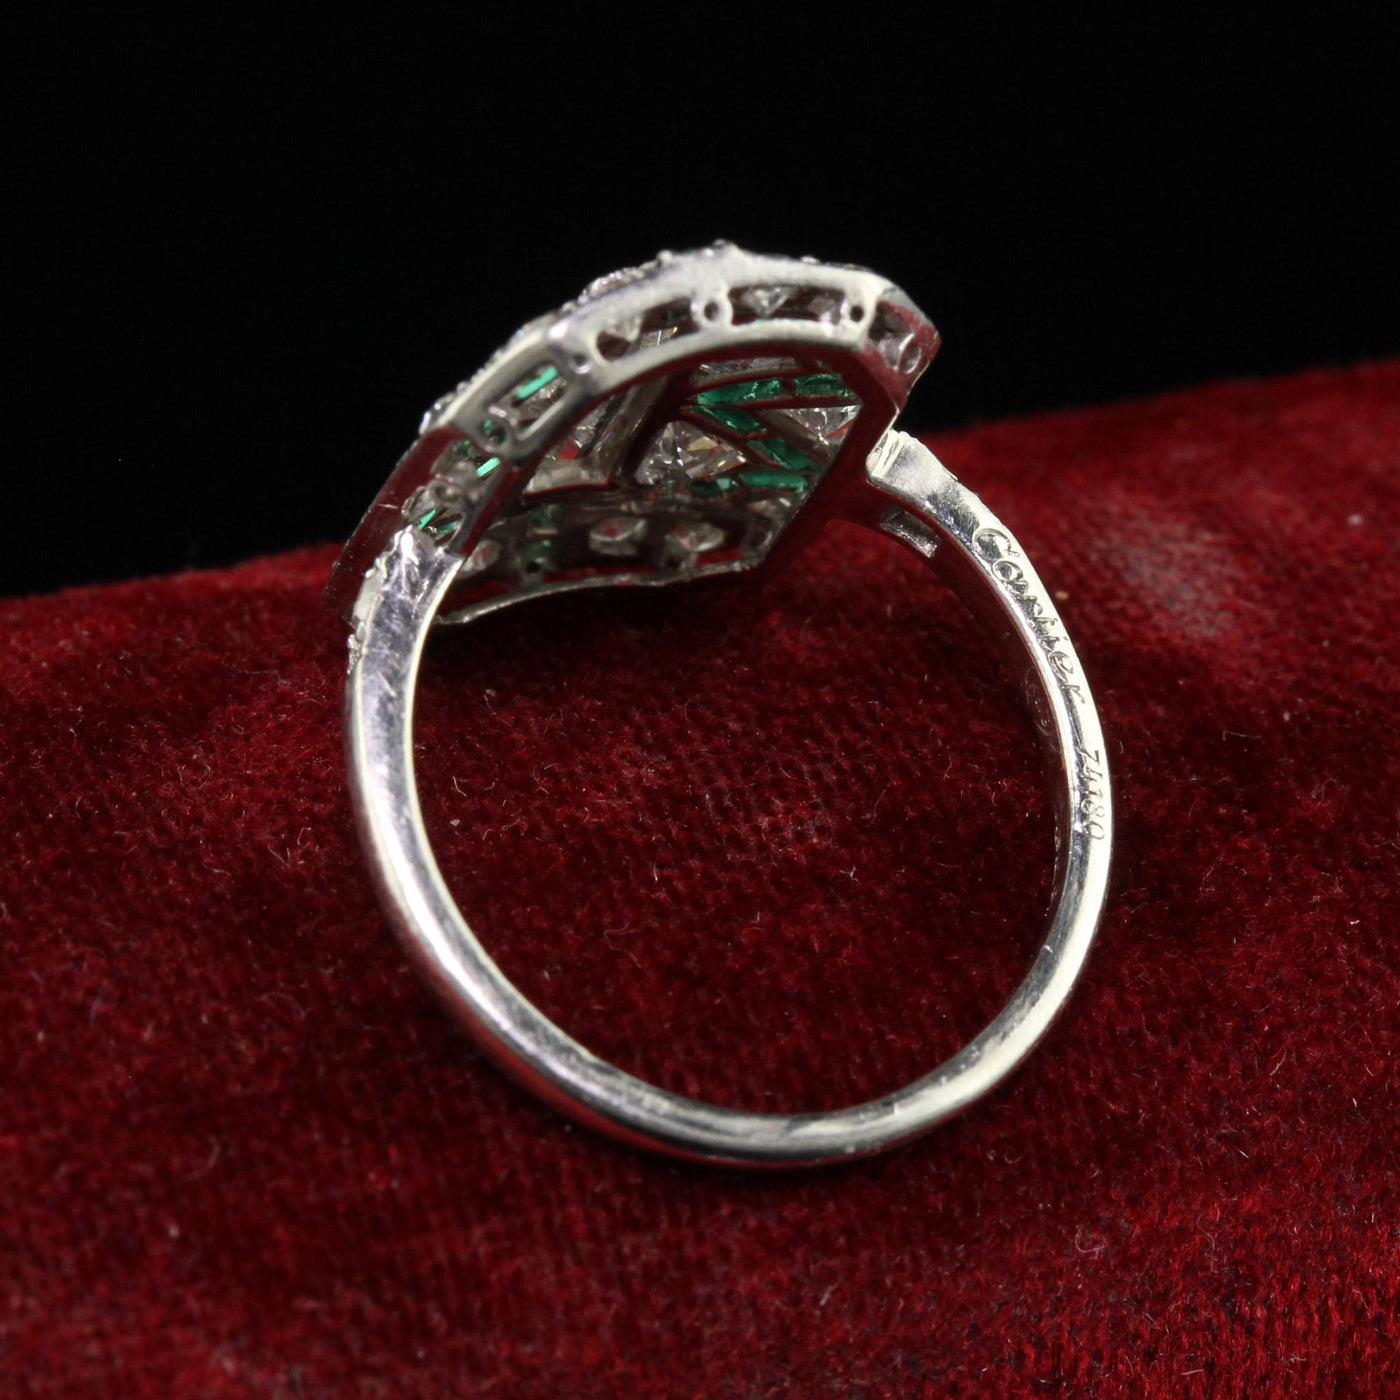 Antique Art Deco Cartier Old Baguette Diamond and Emerald Cocktail Ring